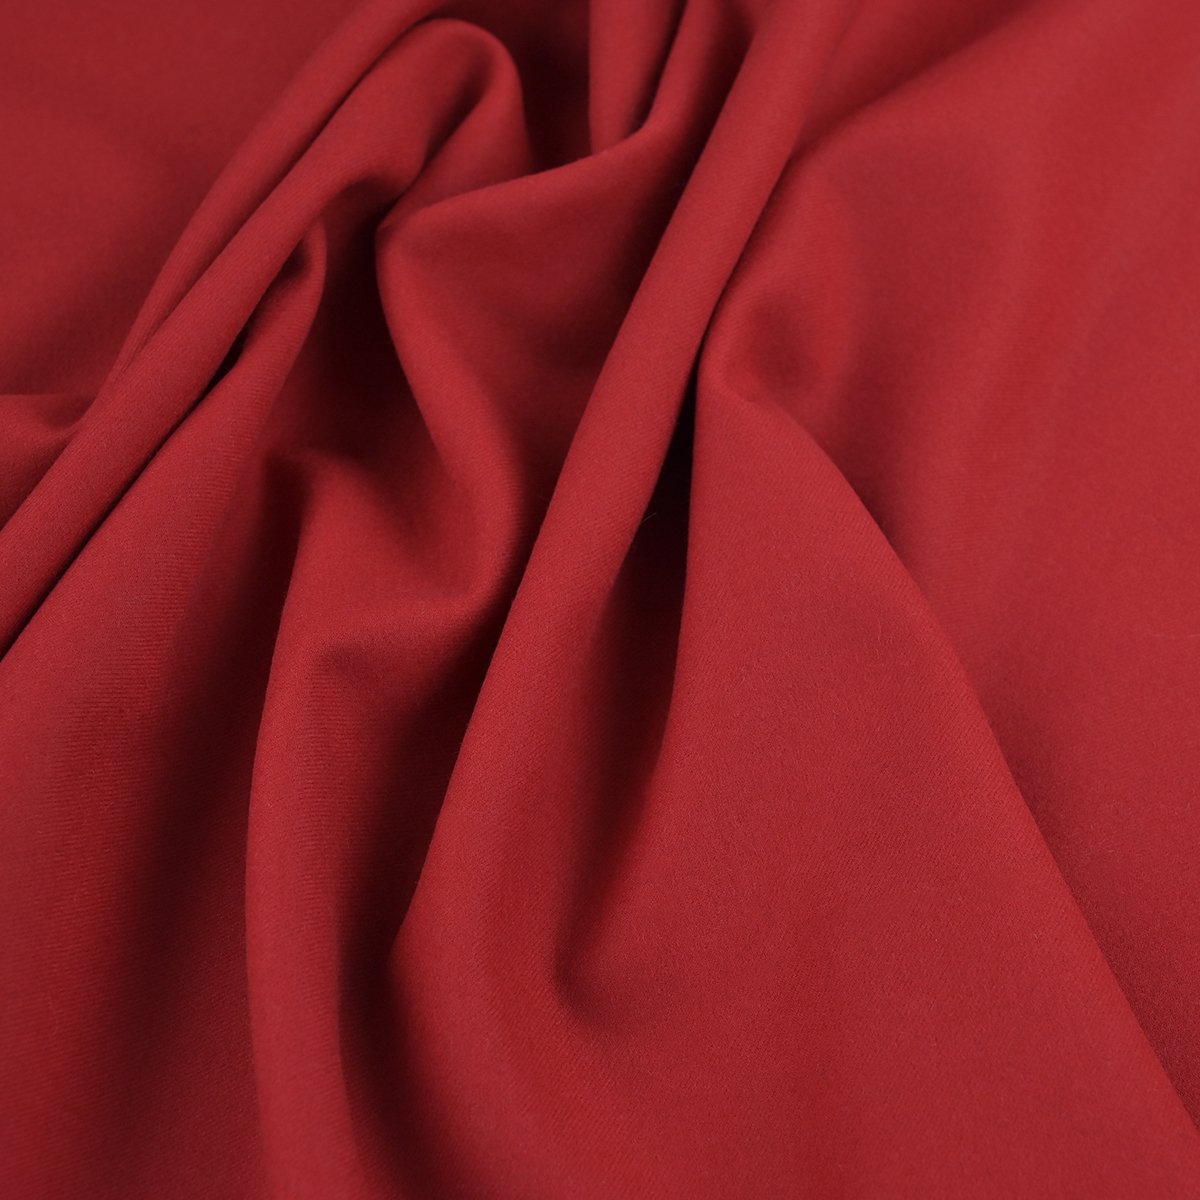 Red Coating Fabric 96652